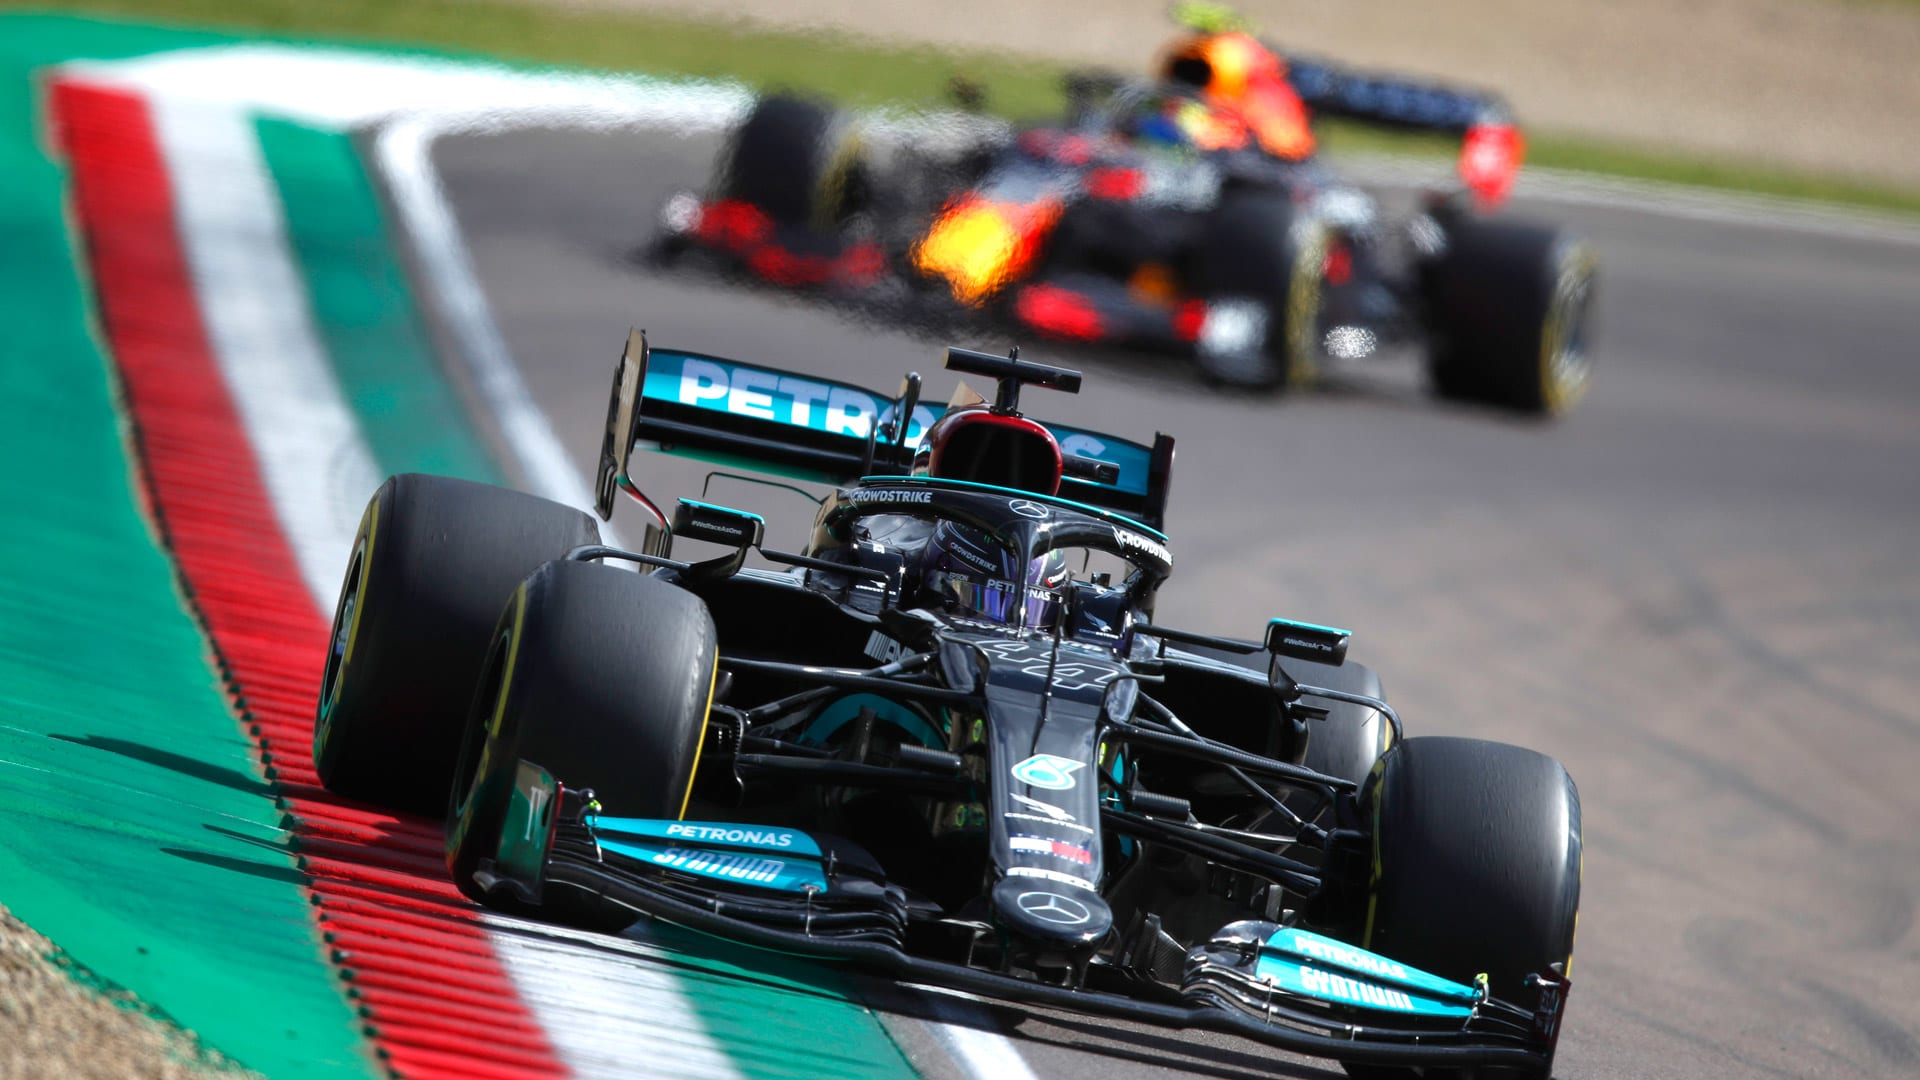 5 things we learned from Friday practice for the Emilia Romagna Grand Prix at Imola Formula 1®